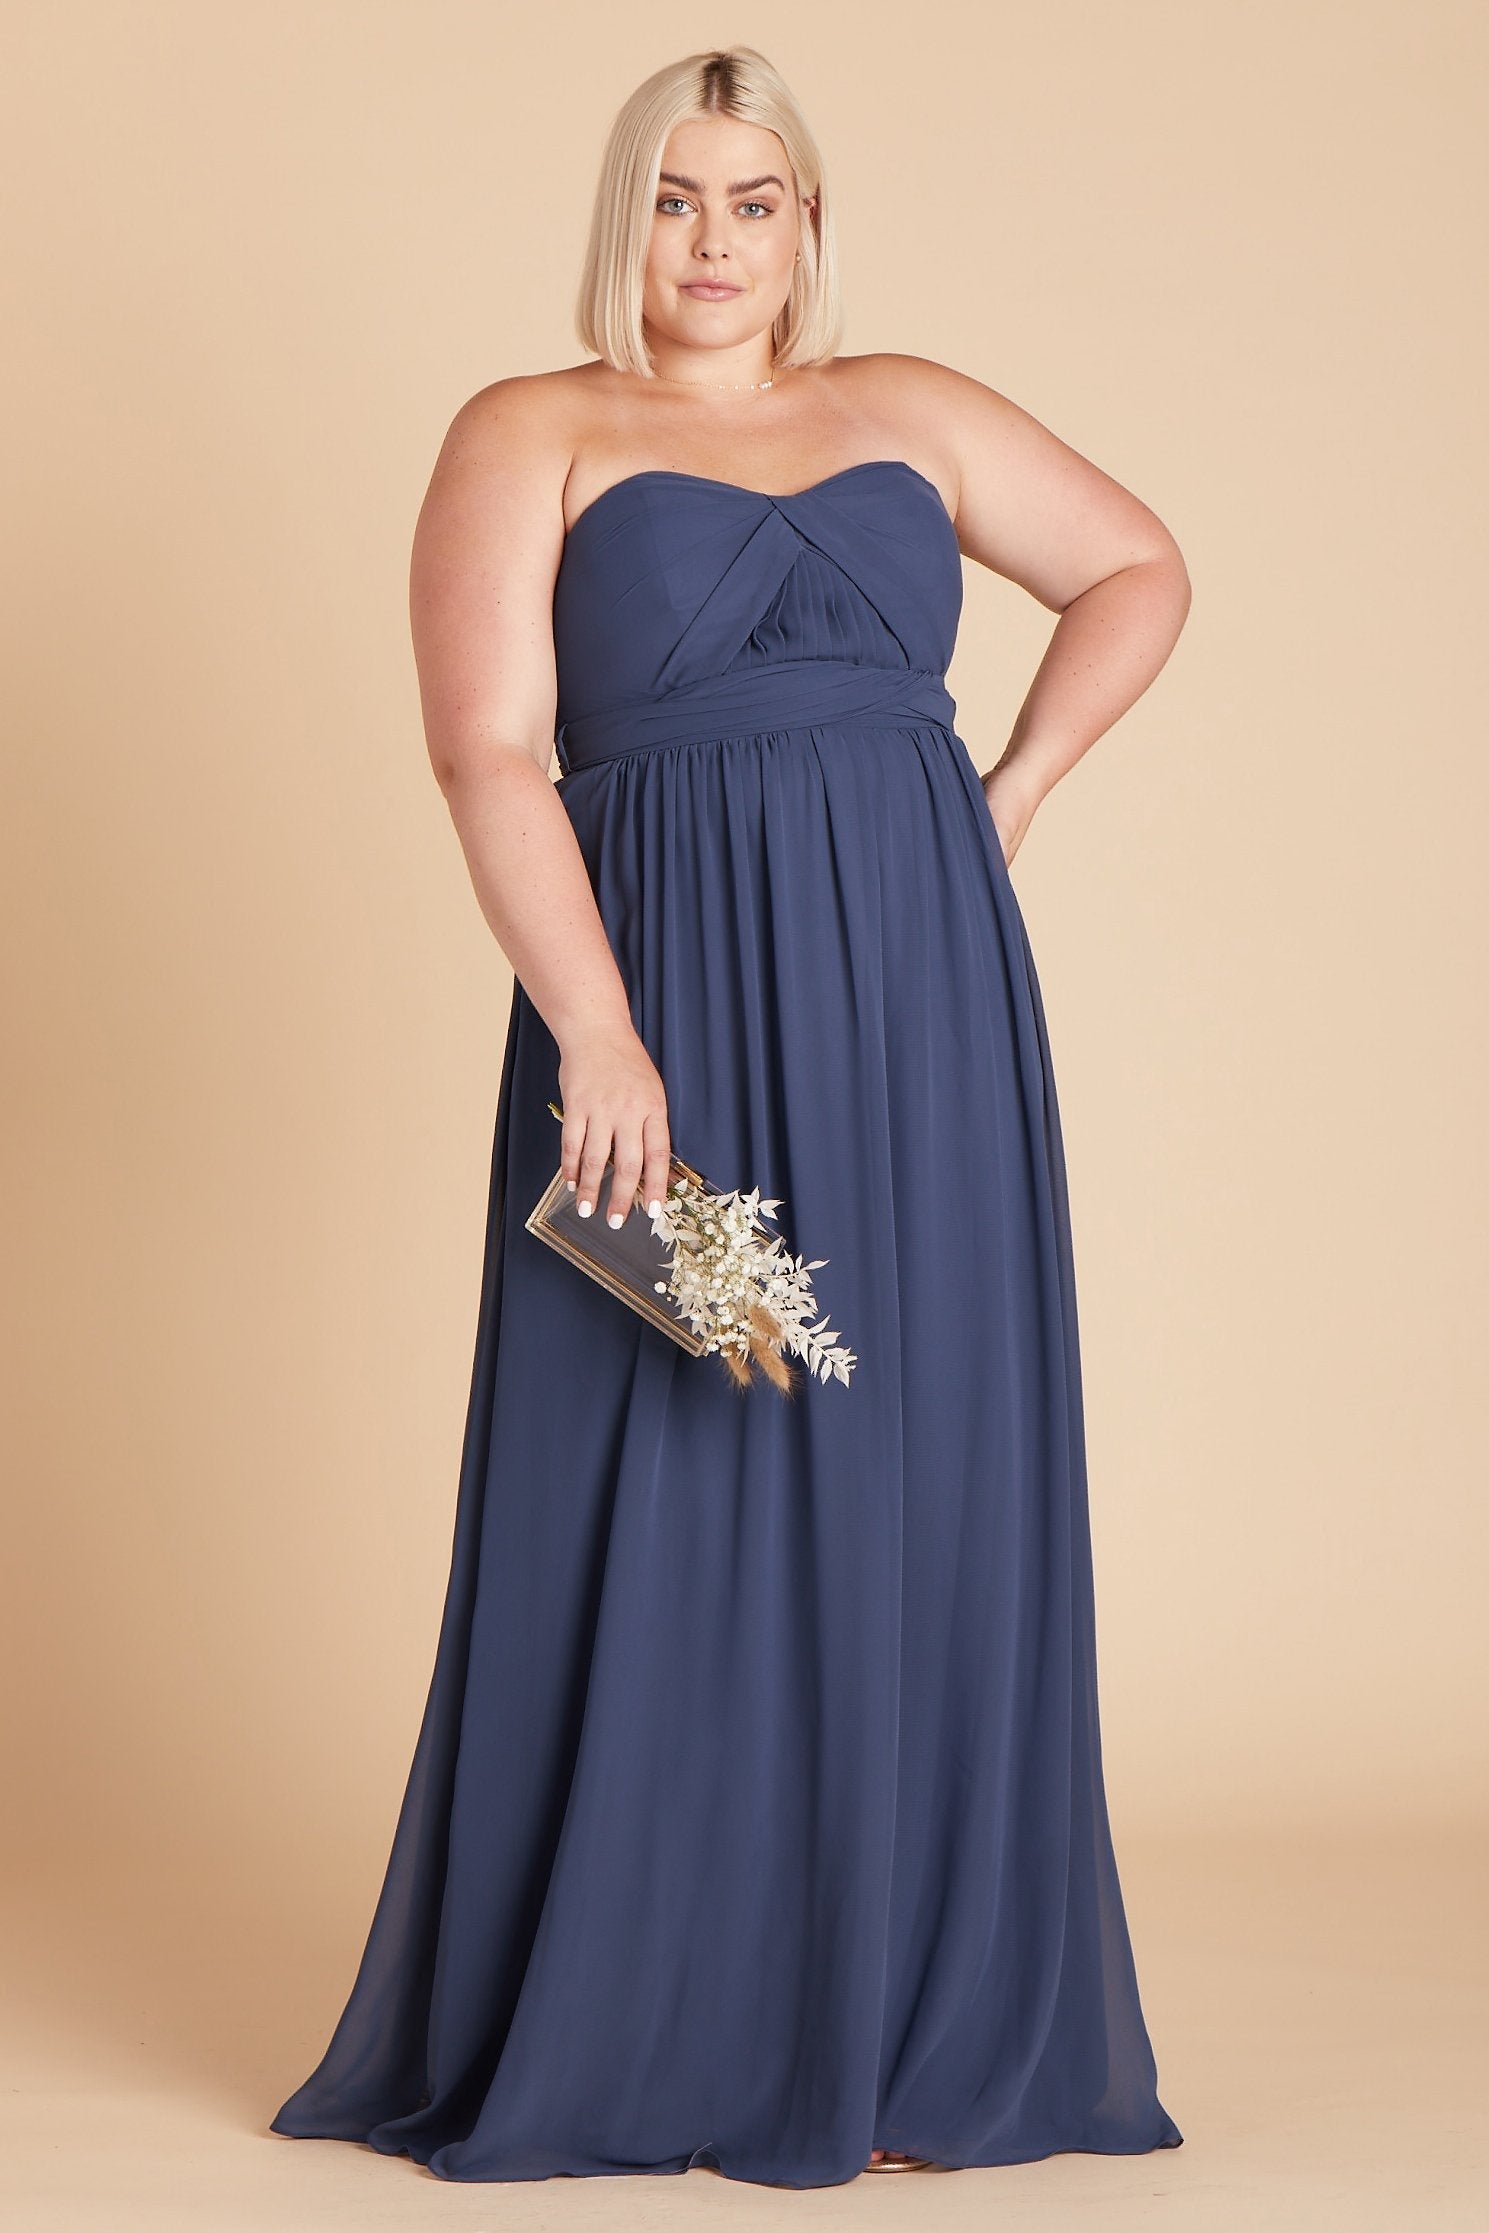 Grace convertible plus size bridesmaid dress in slate blue chiffon by Birdy Grey, front view